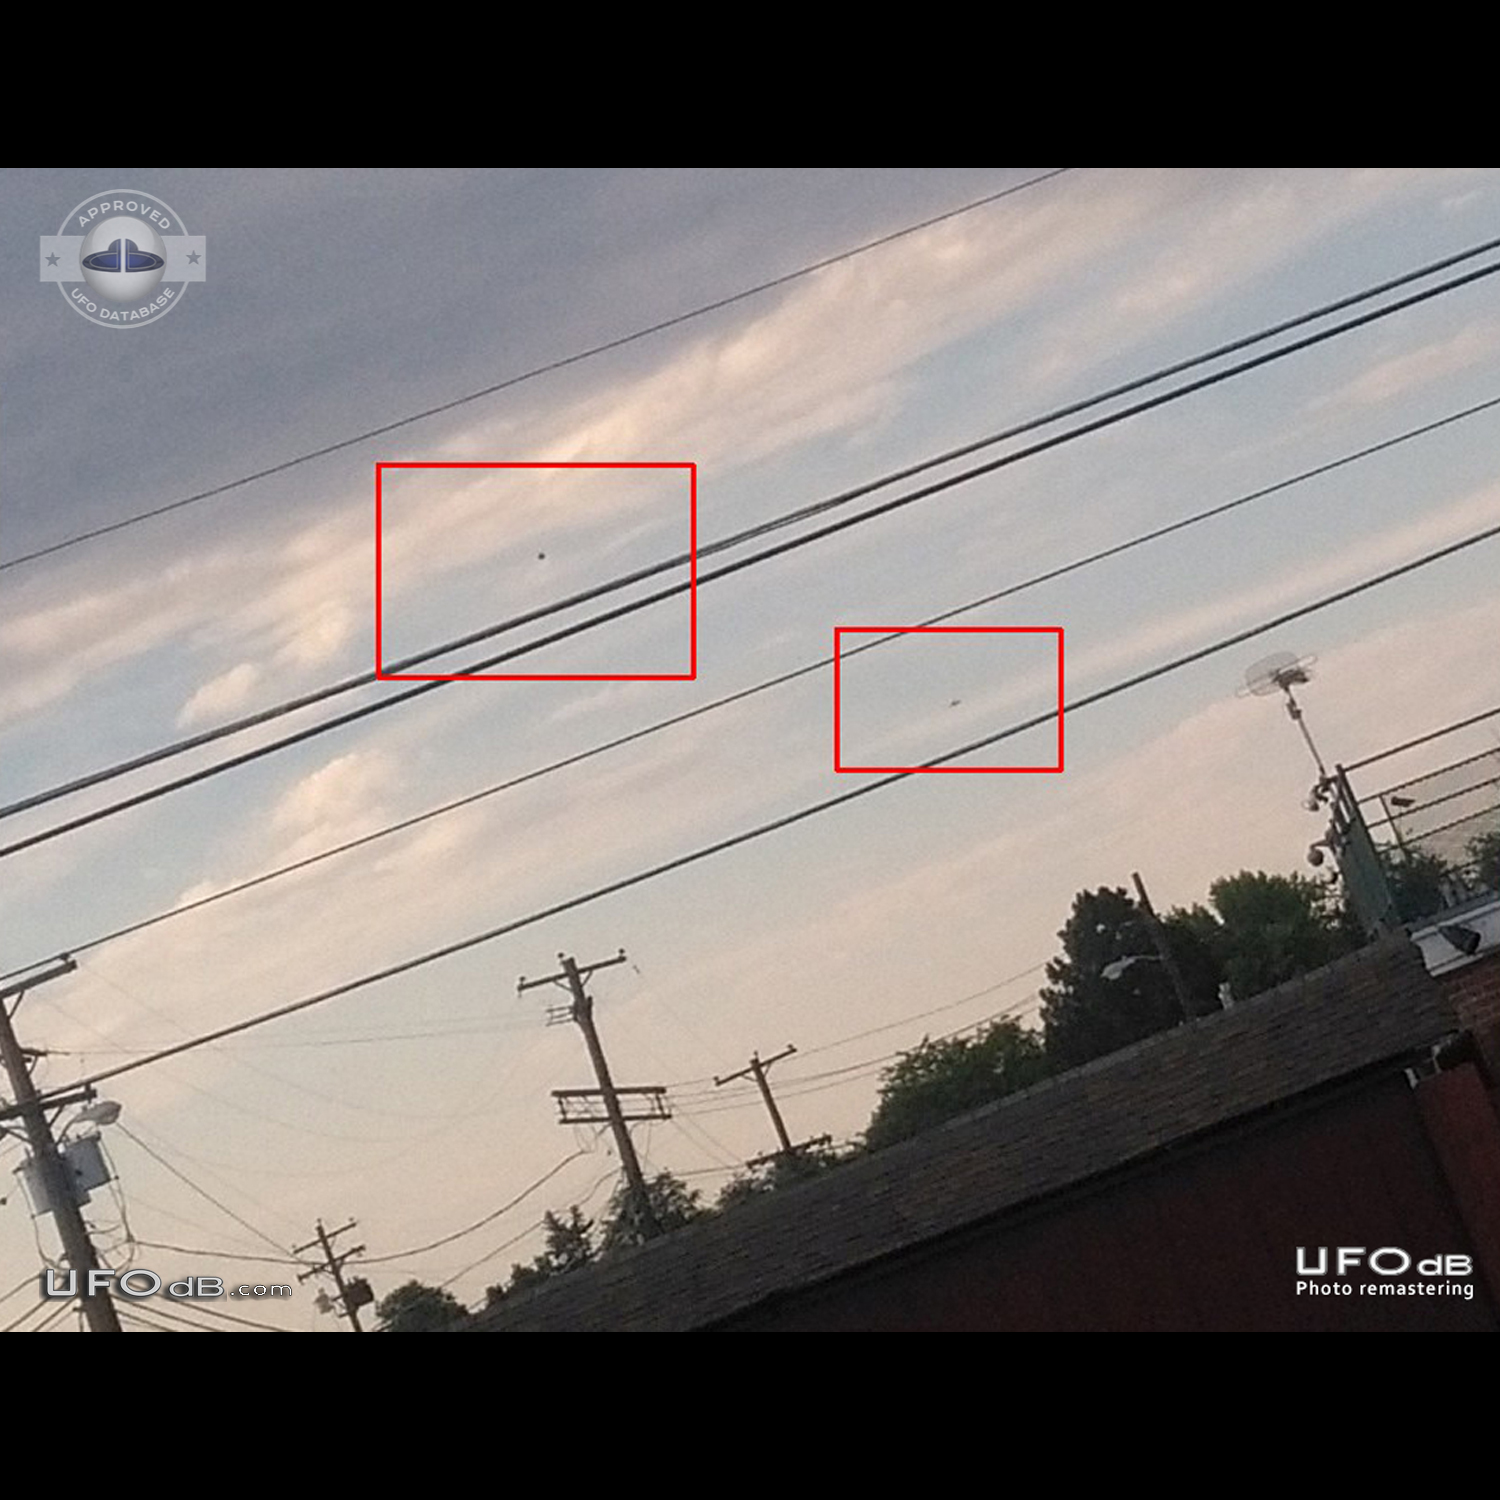 Stationary black orb observed while stuck in traffic in Aurora Colorad UFO Picture #848-1